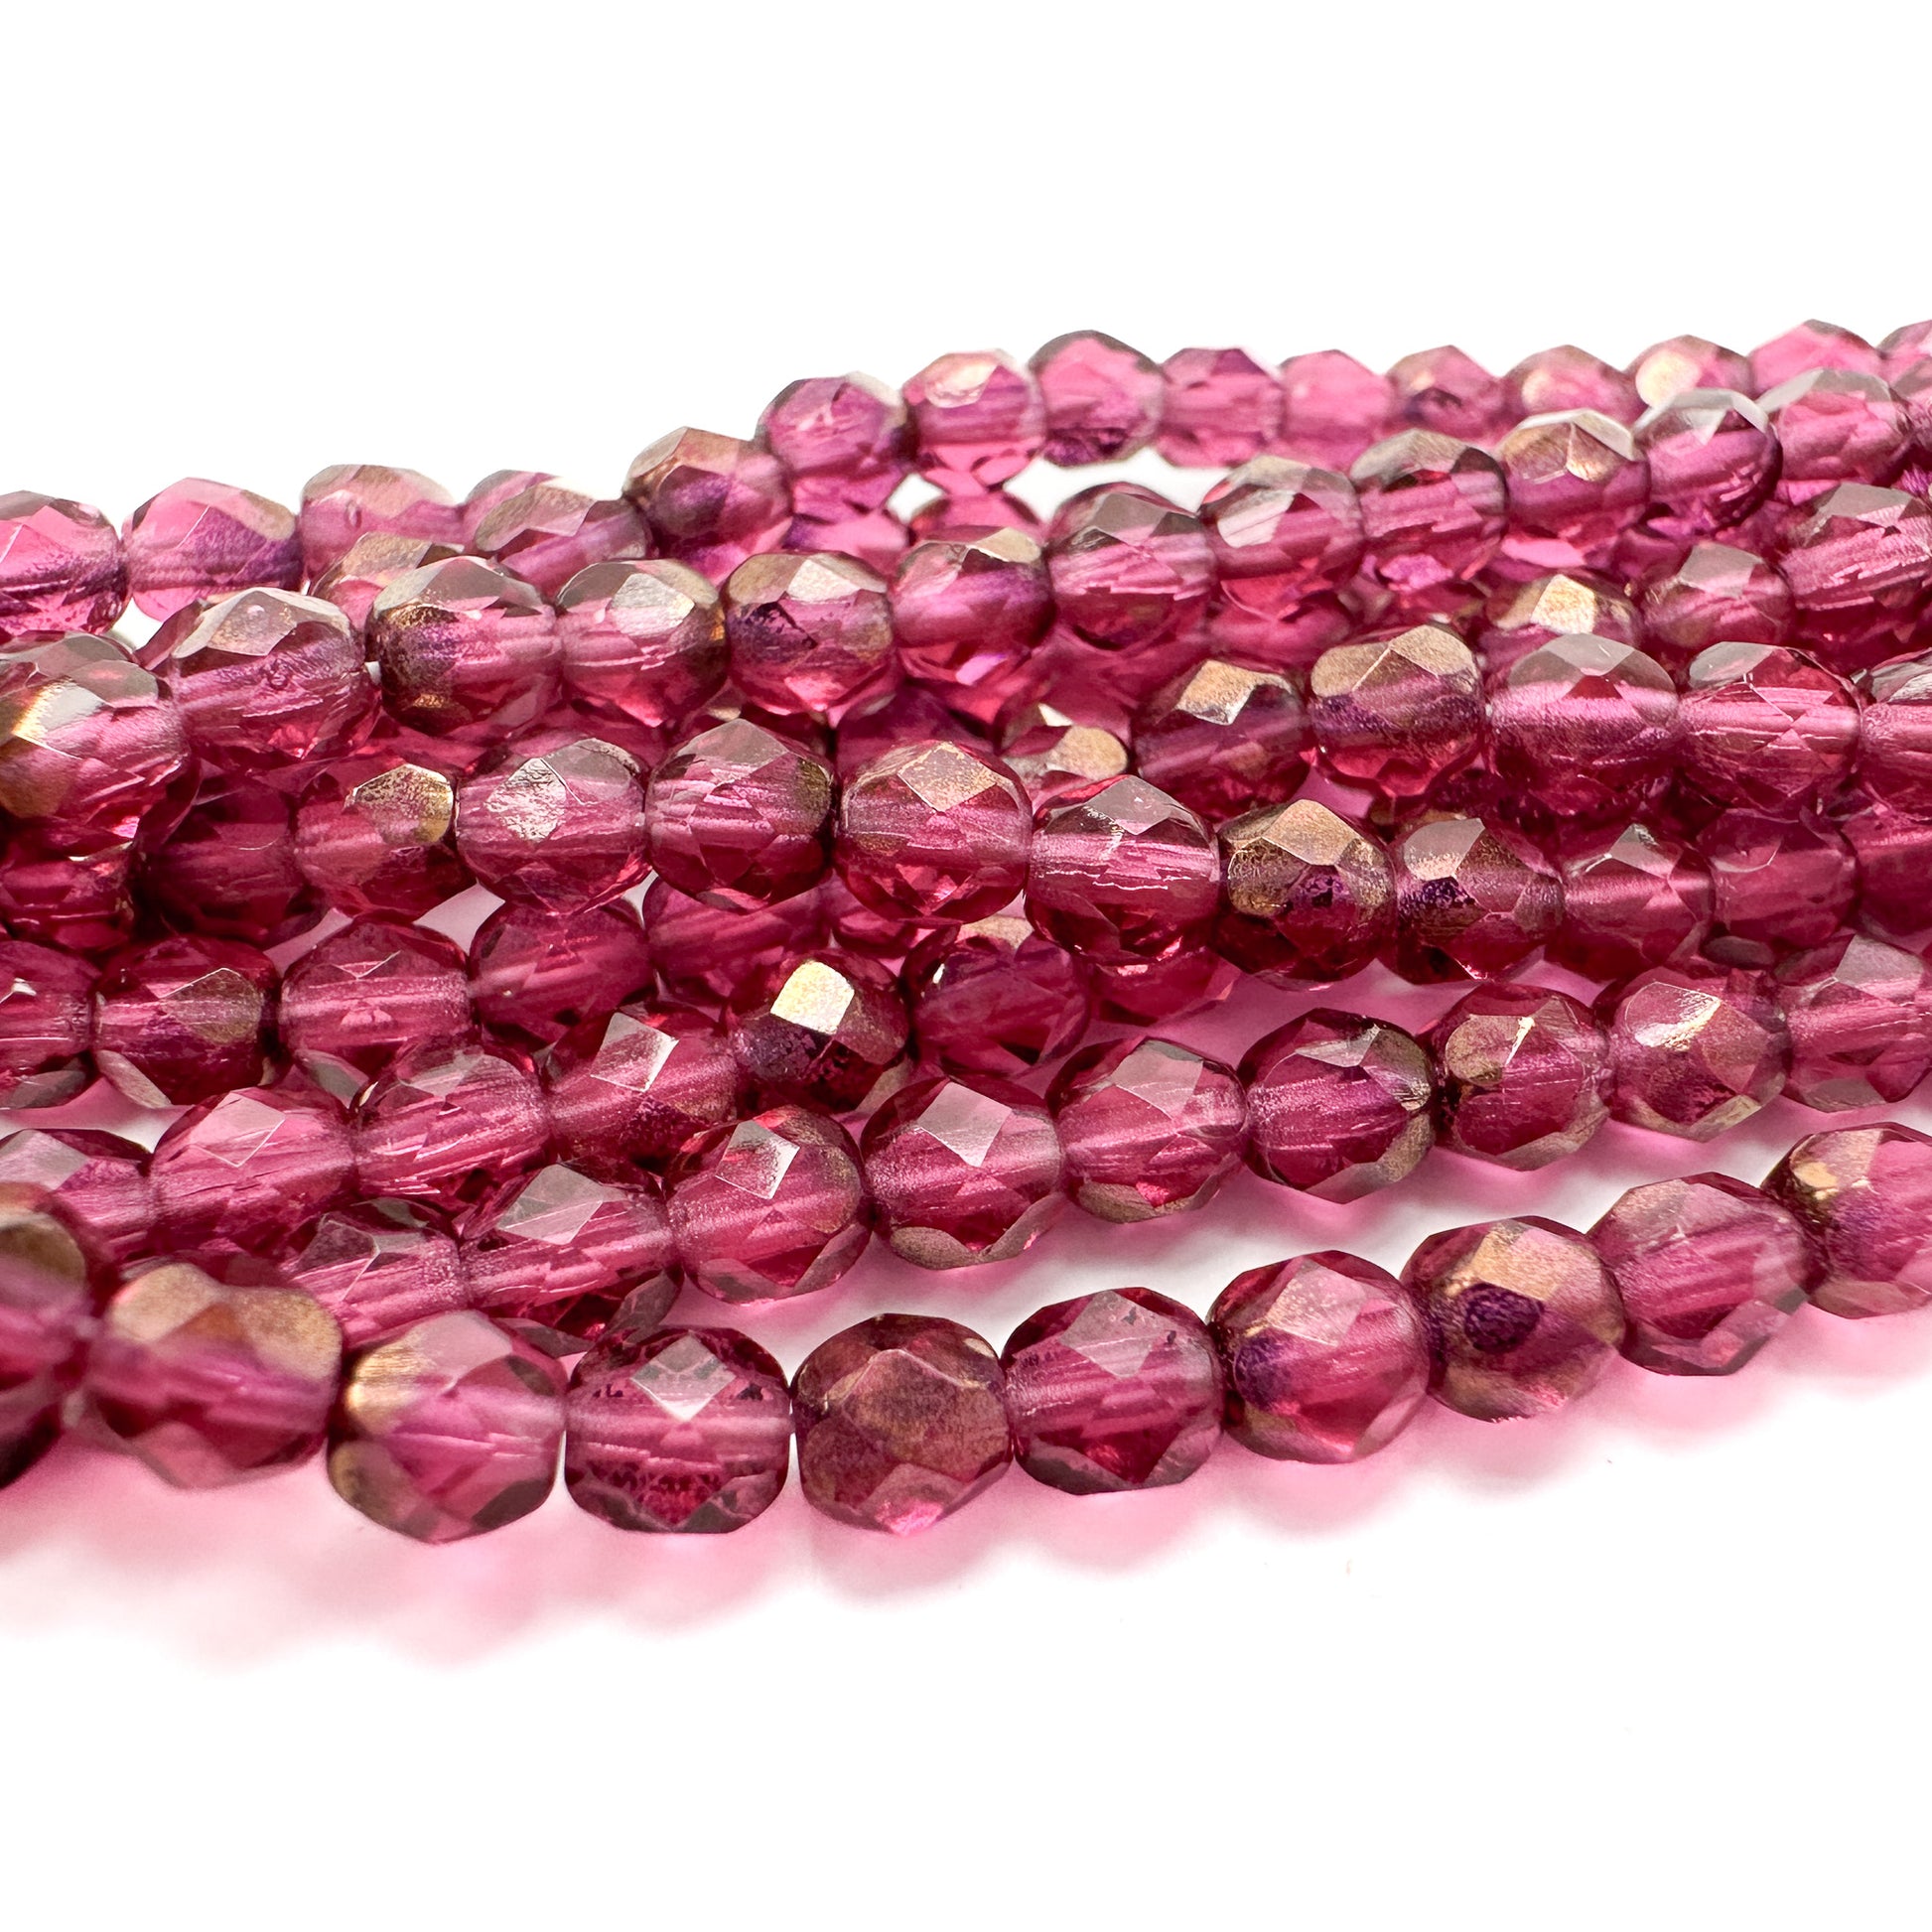 Fuchsia with Bronze Half Coat 4mm Faceted Glass Bead - 50 pcs.-The Bead Gallery Honolulu